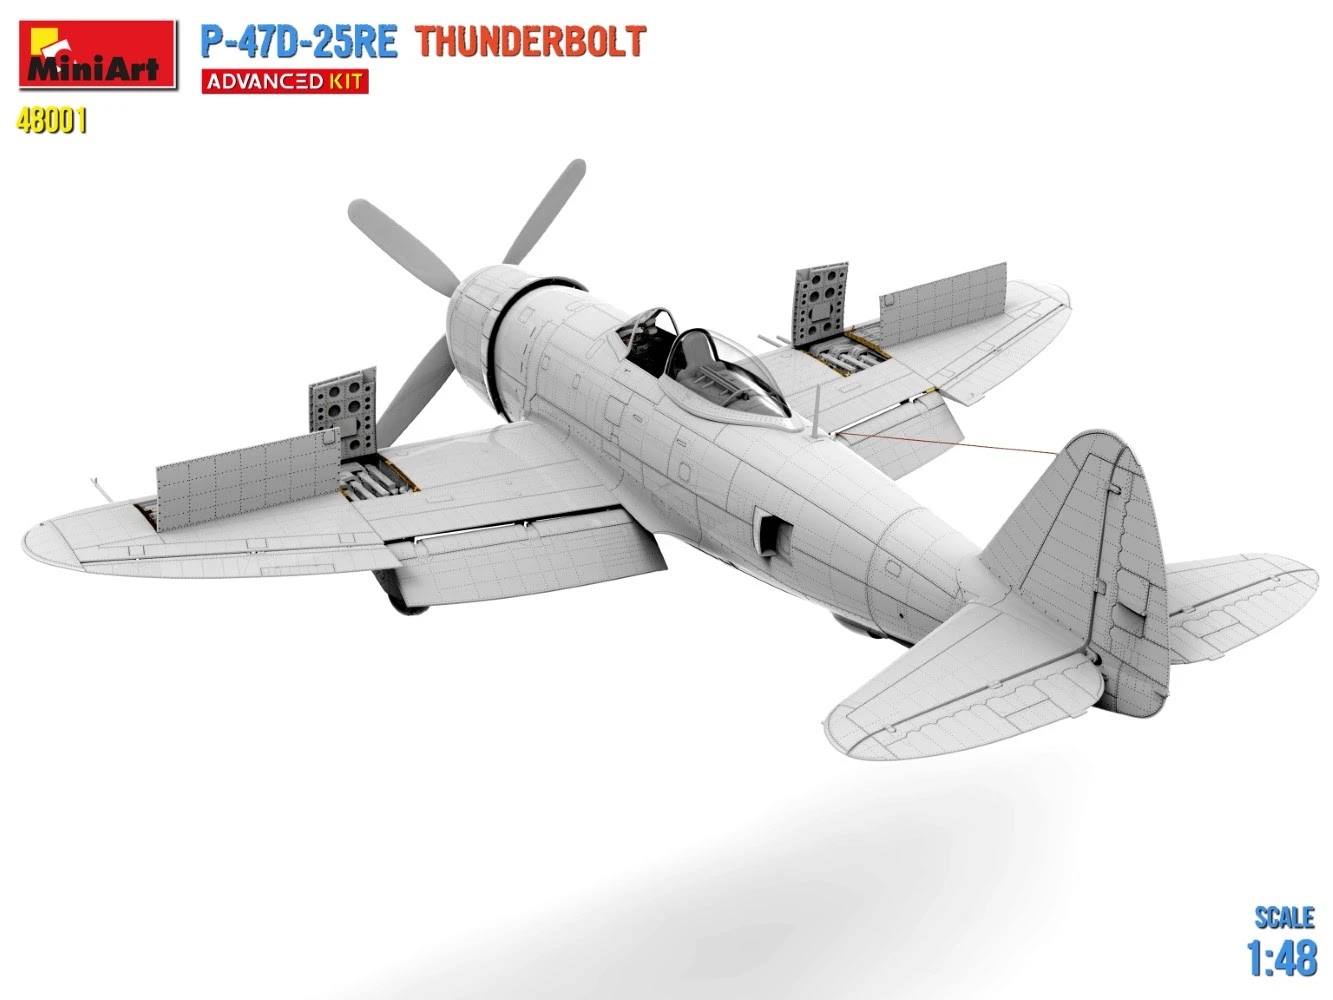 MiniArt ups the detail on their P-47D CAD-5